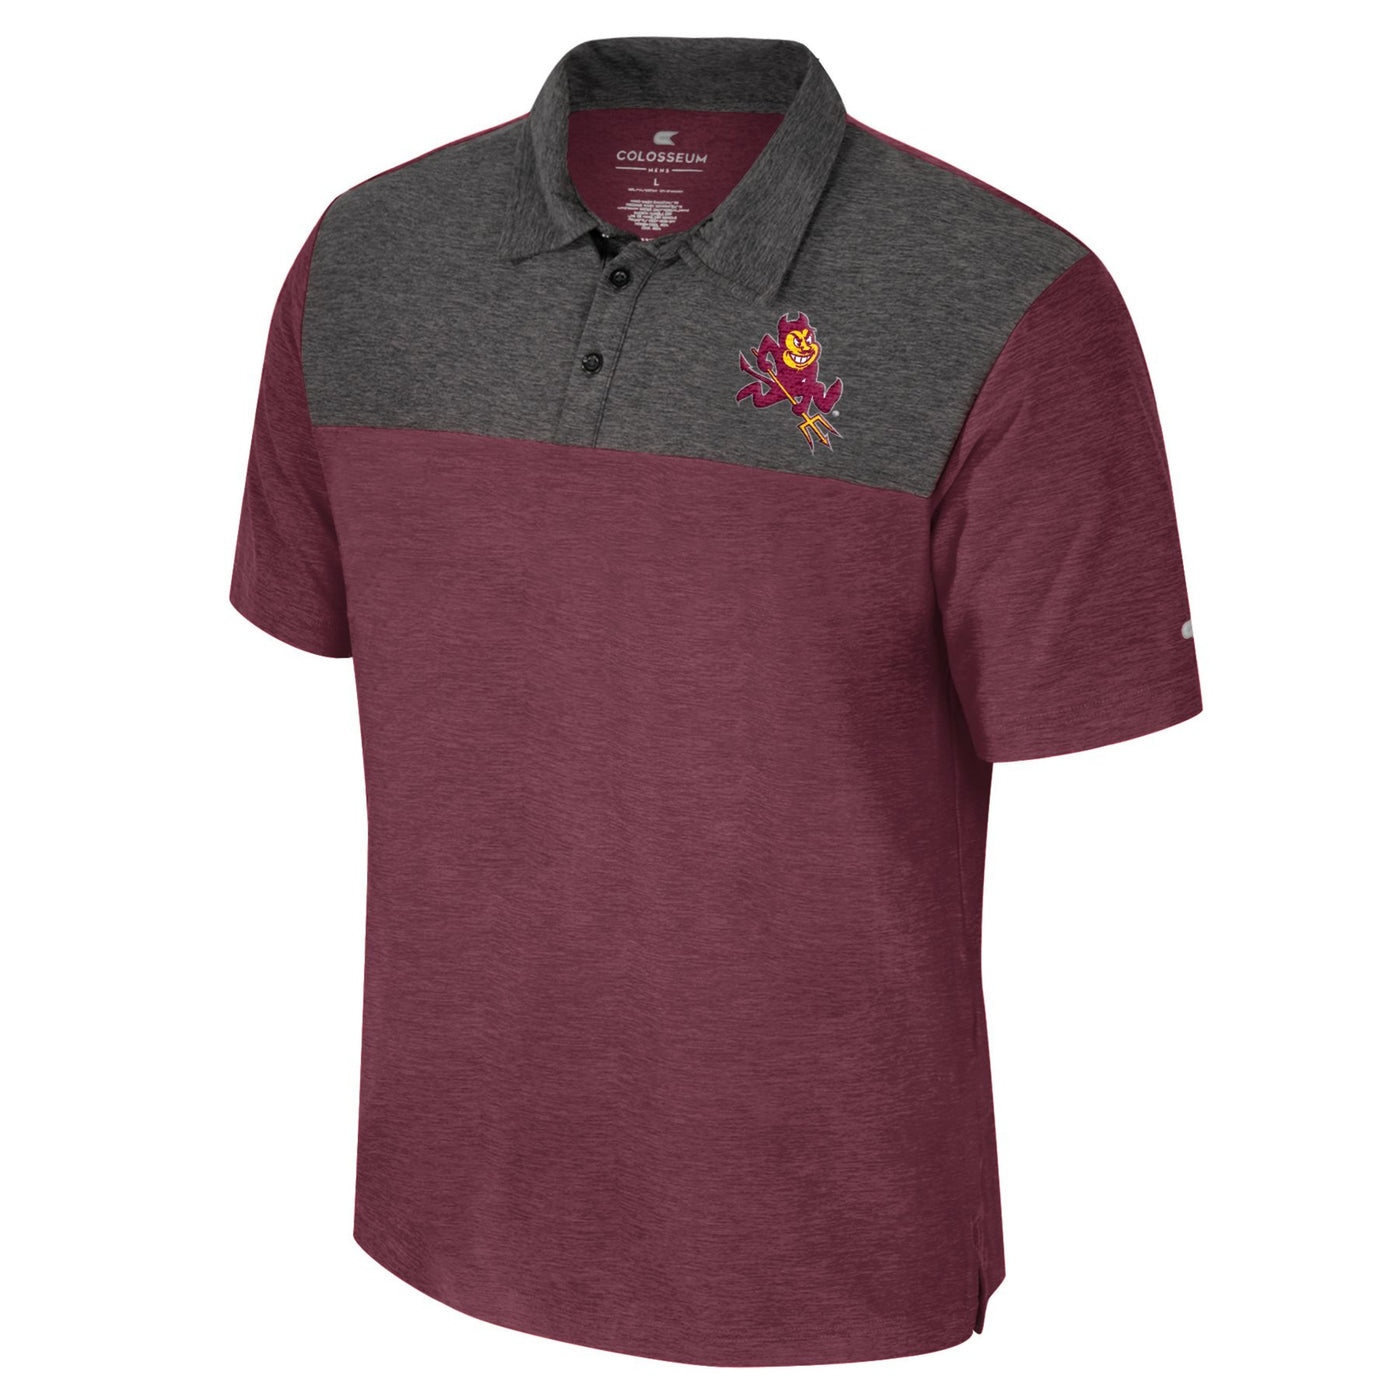 ASU maroon and grey polo. maroon on arms and stomach area and grey on chest and shoulder. Small sparky mascot on side of chest.